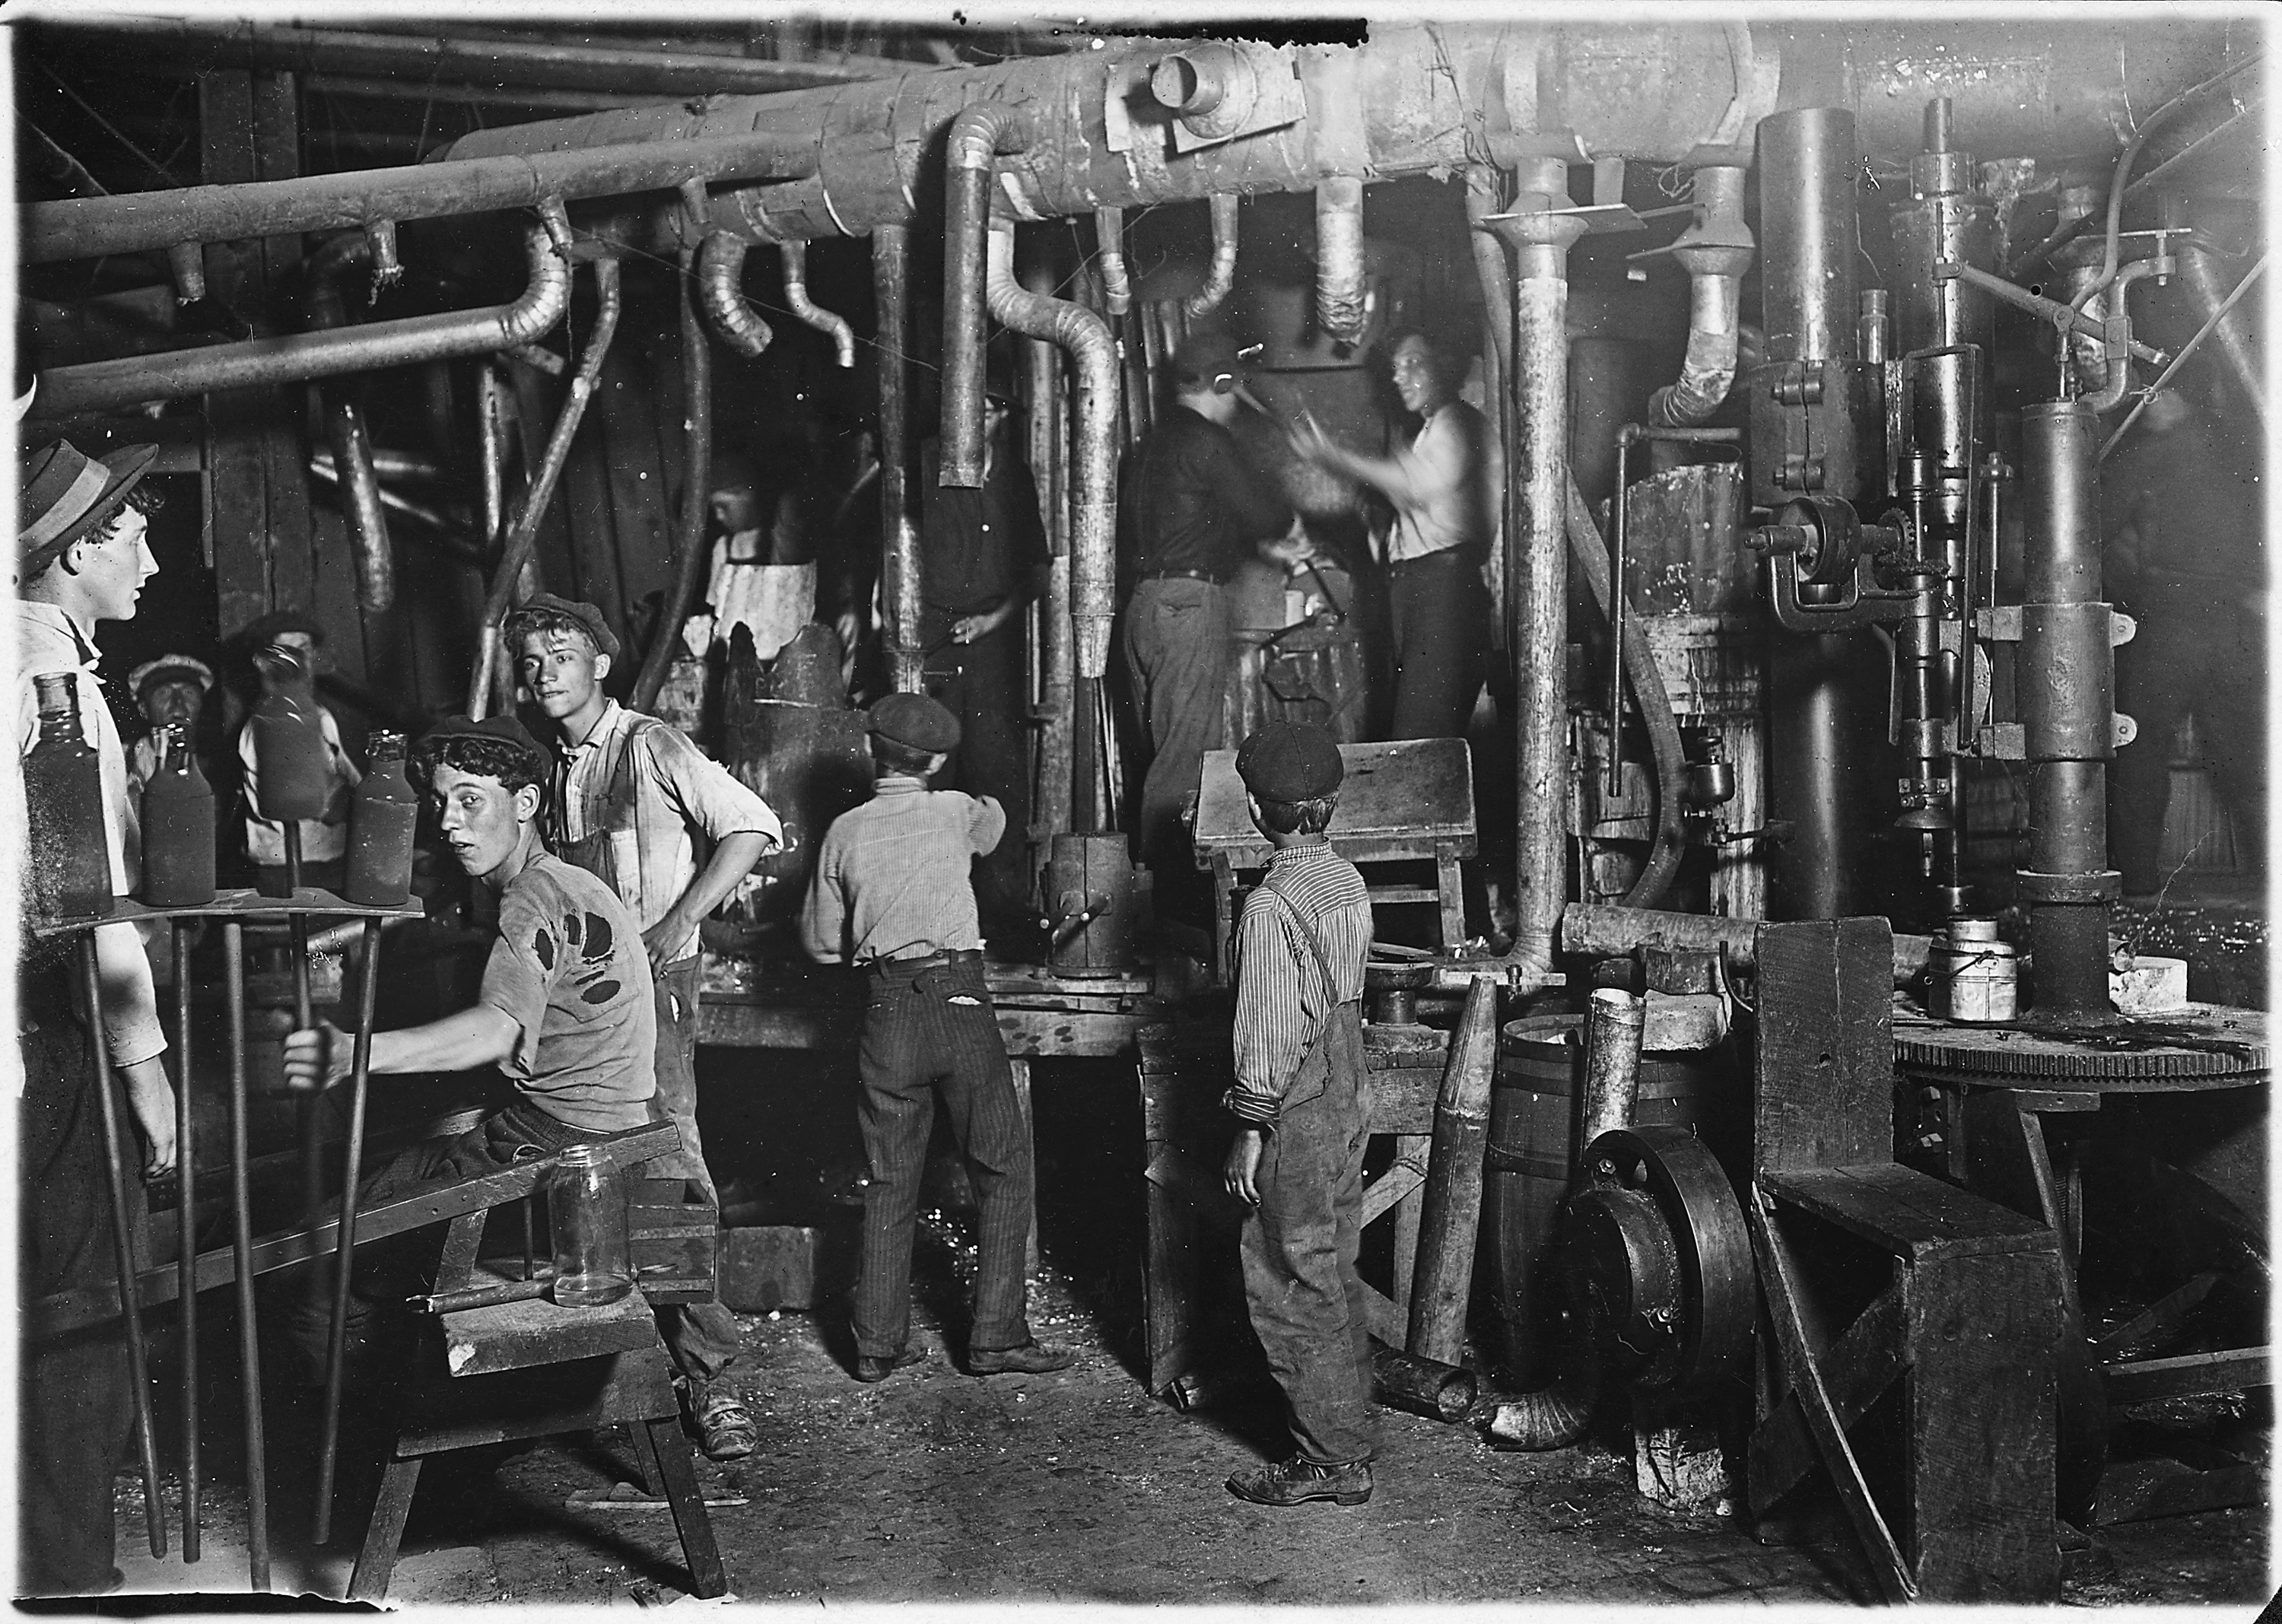 9 P.M. in an Indiana Glass Works. Indiana. - NARA - 523086